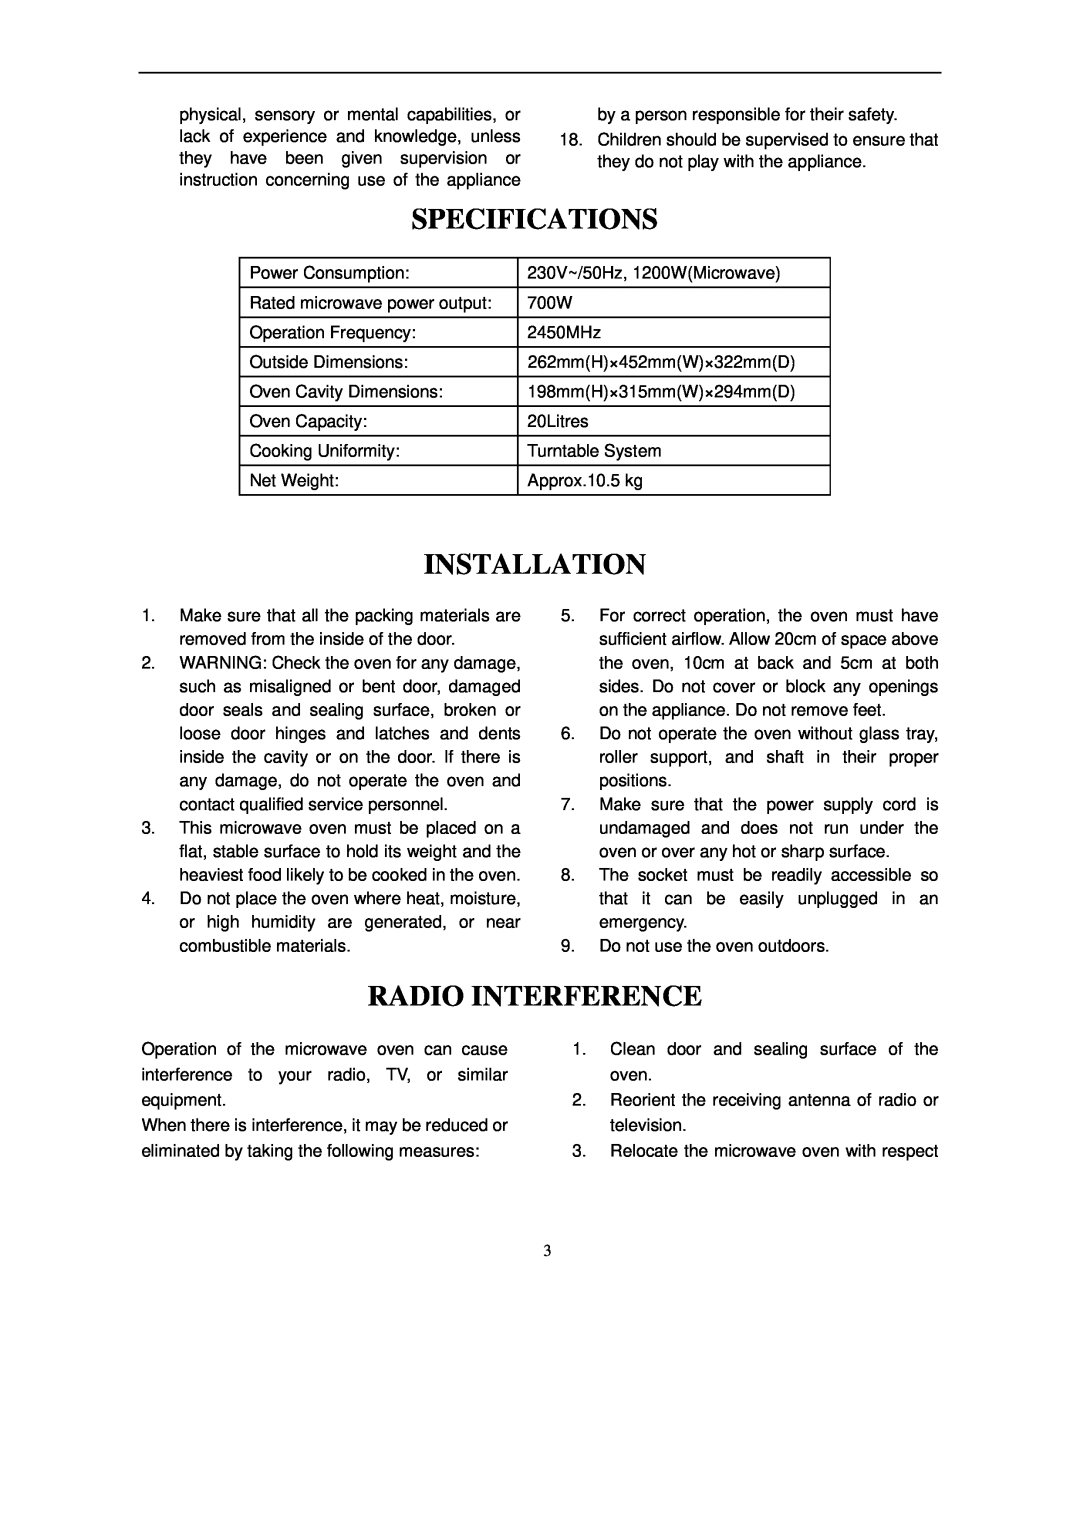 Haier HGN-2070M owner manual Specifications, Installation, Radio Interference 